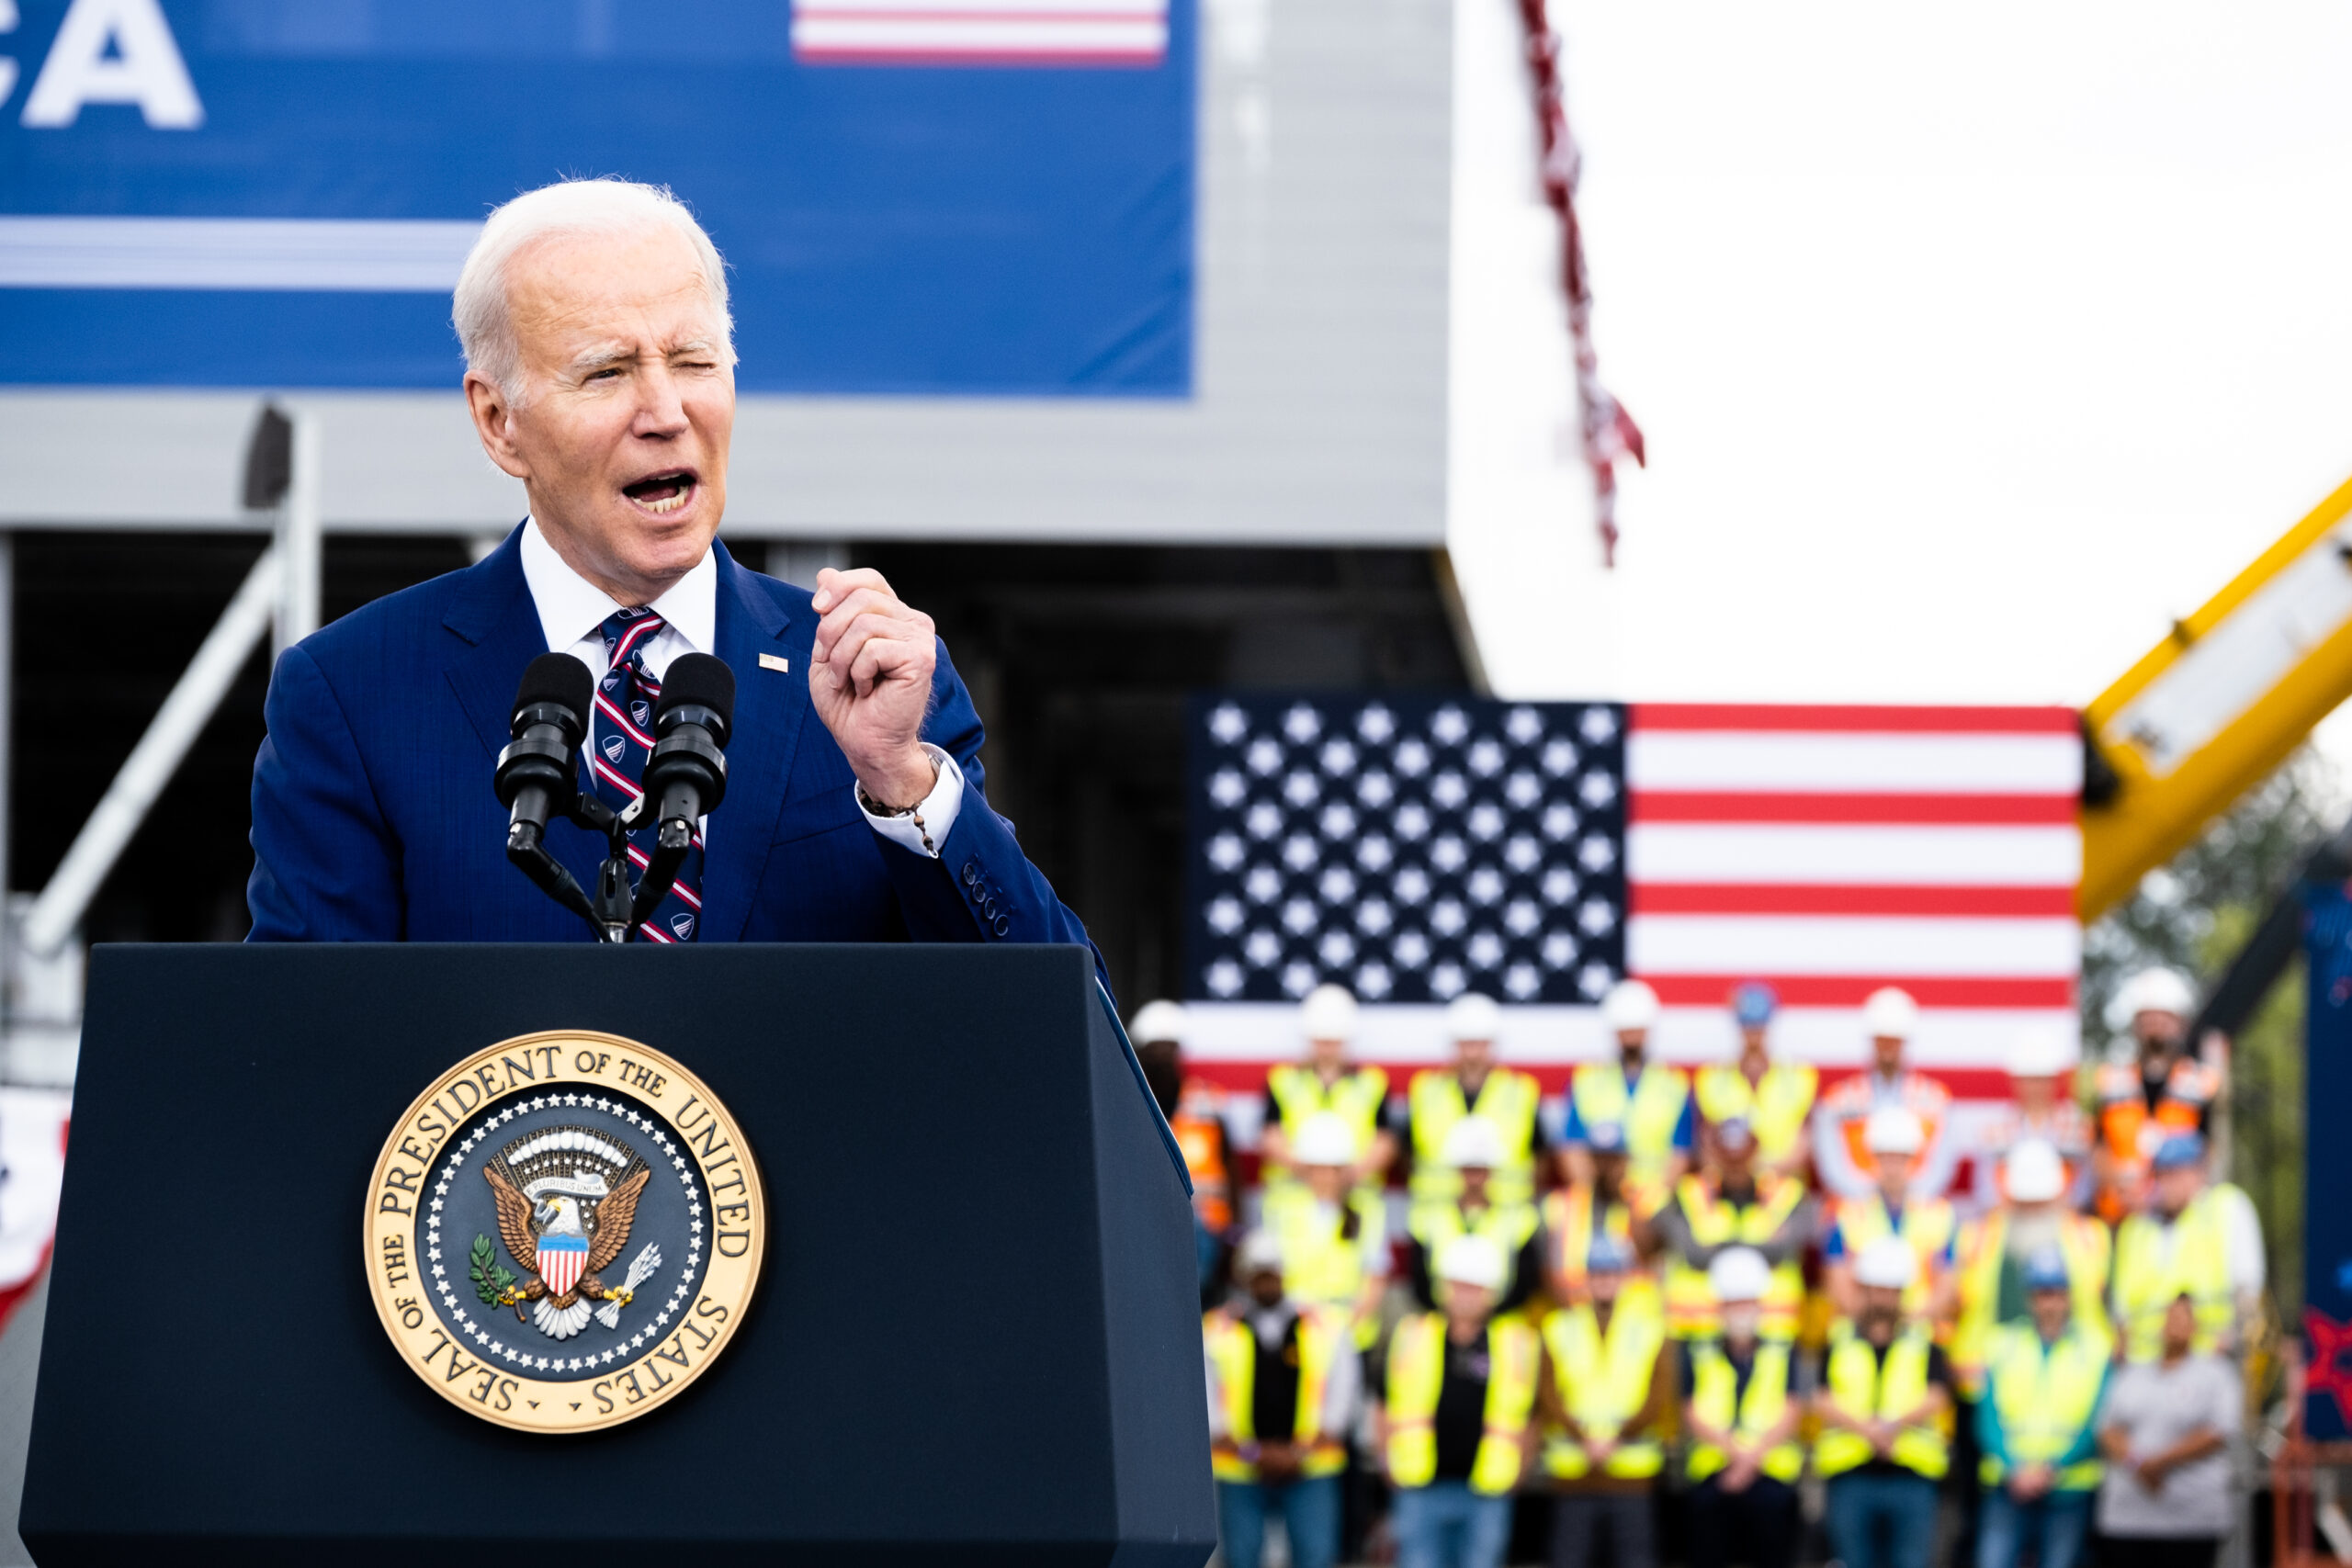 Wage Growth Slows Even As Unemployment Falls; Biden Says There Are More Jobs ‘You Can Raise A Family On’